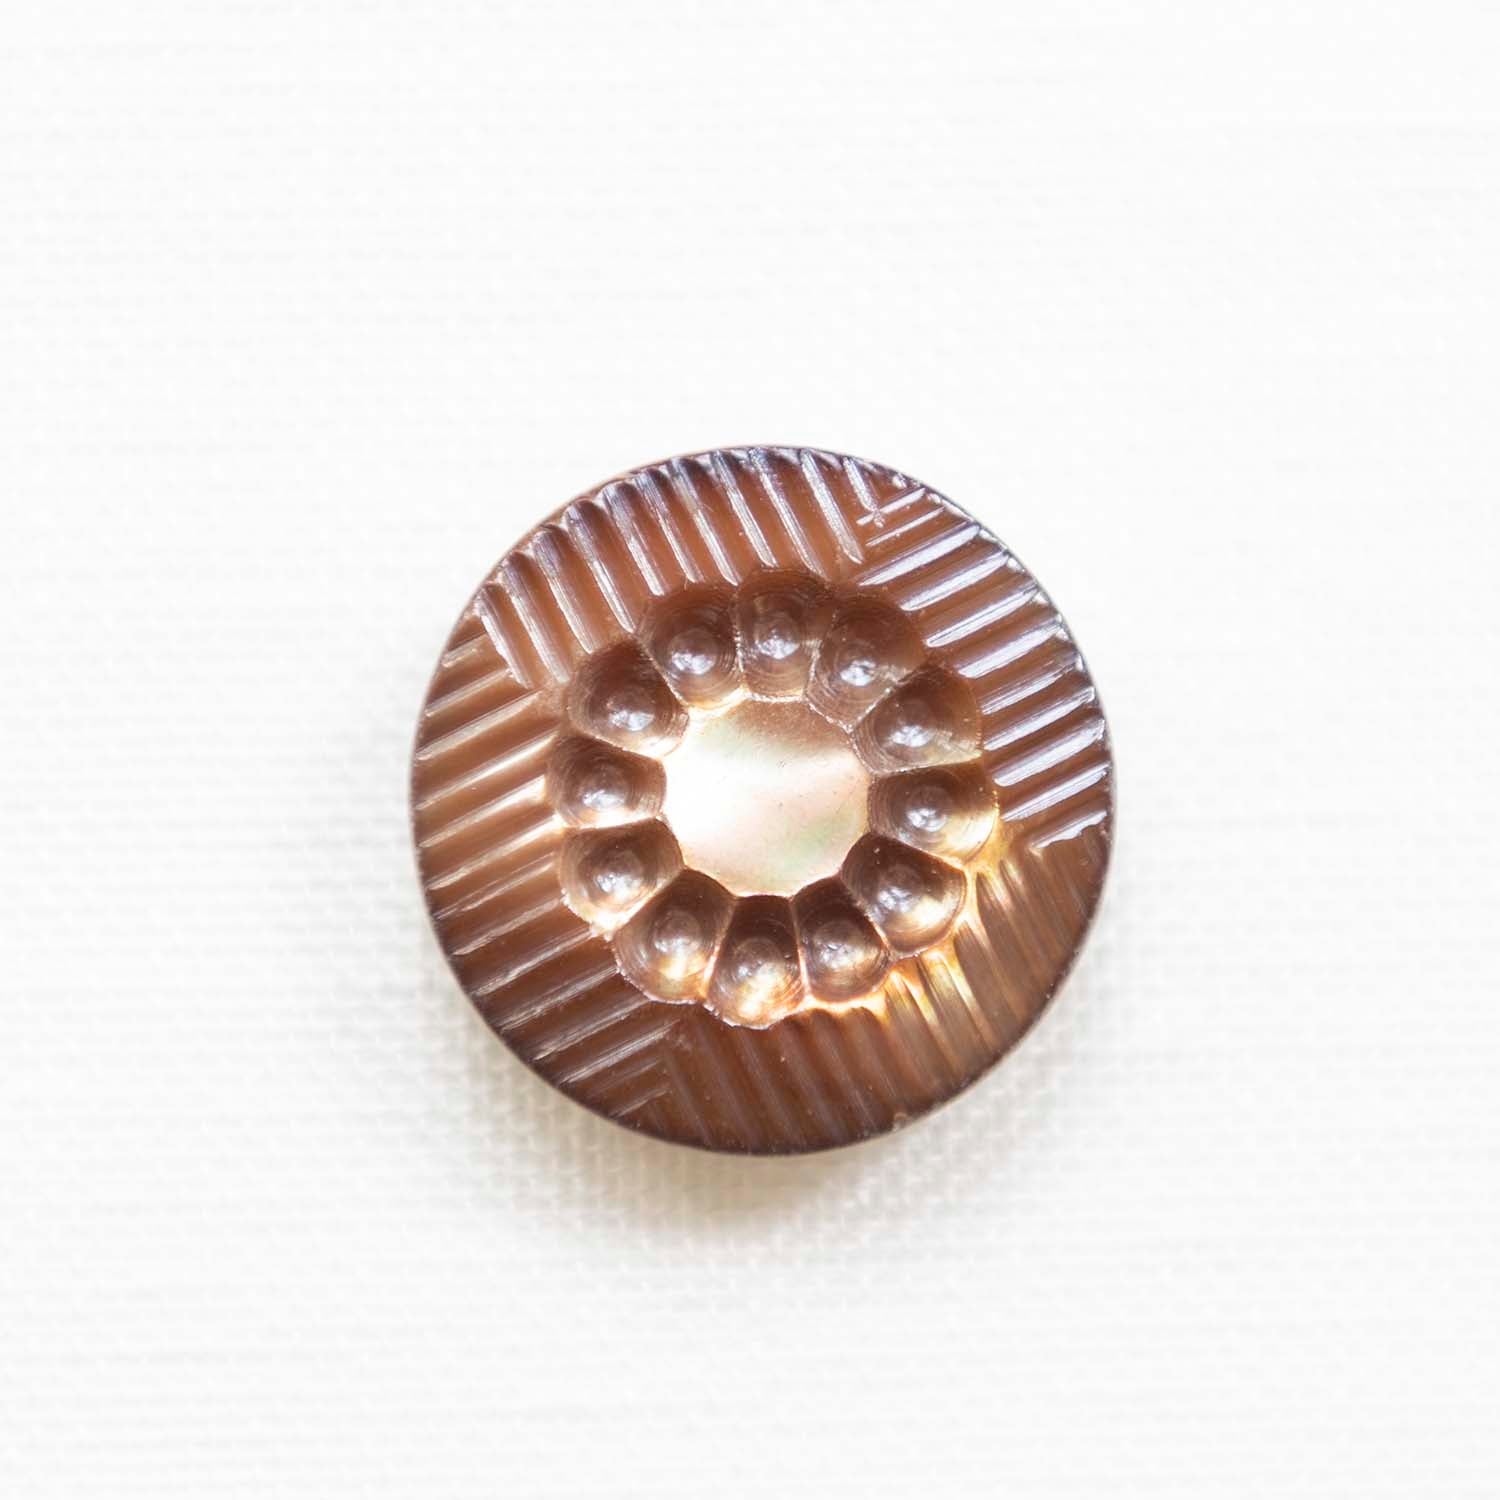 Antique mother of pearl button